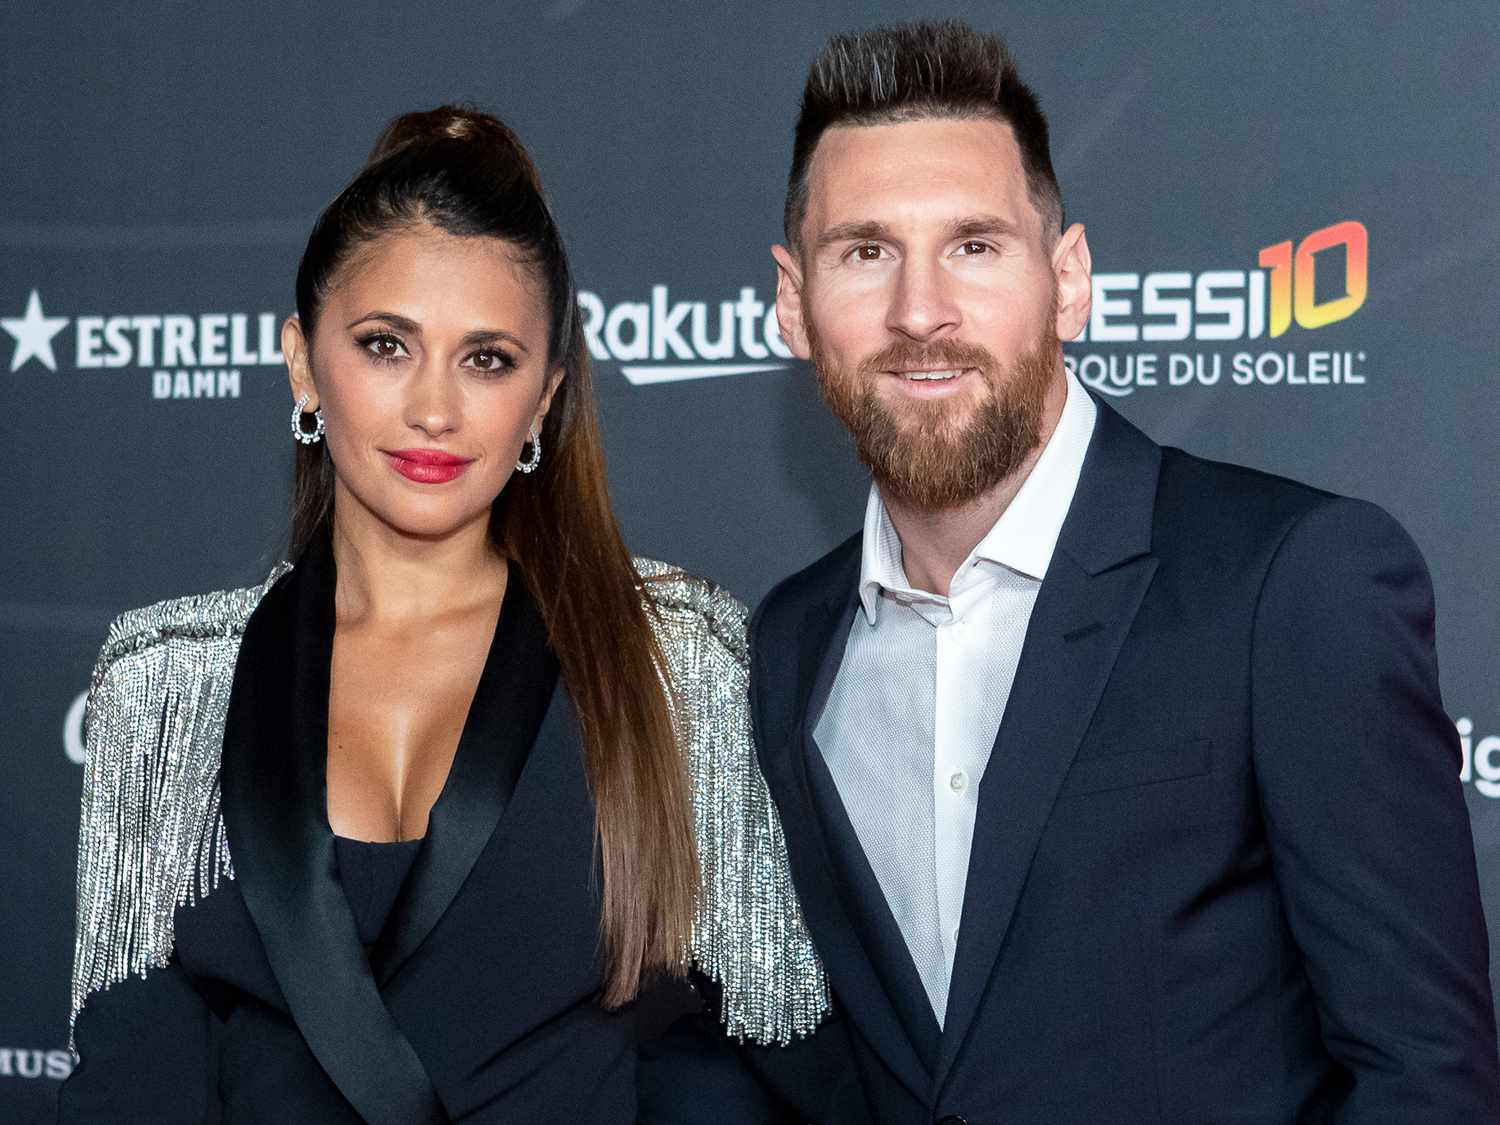 Liionel Messi Wife